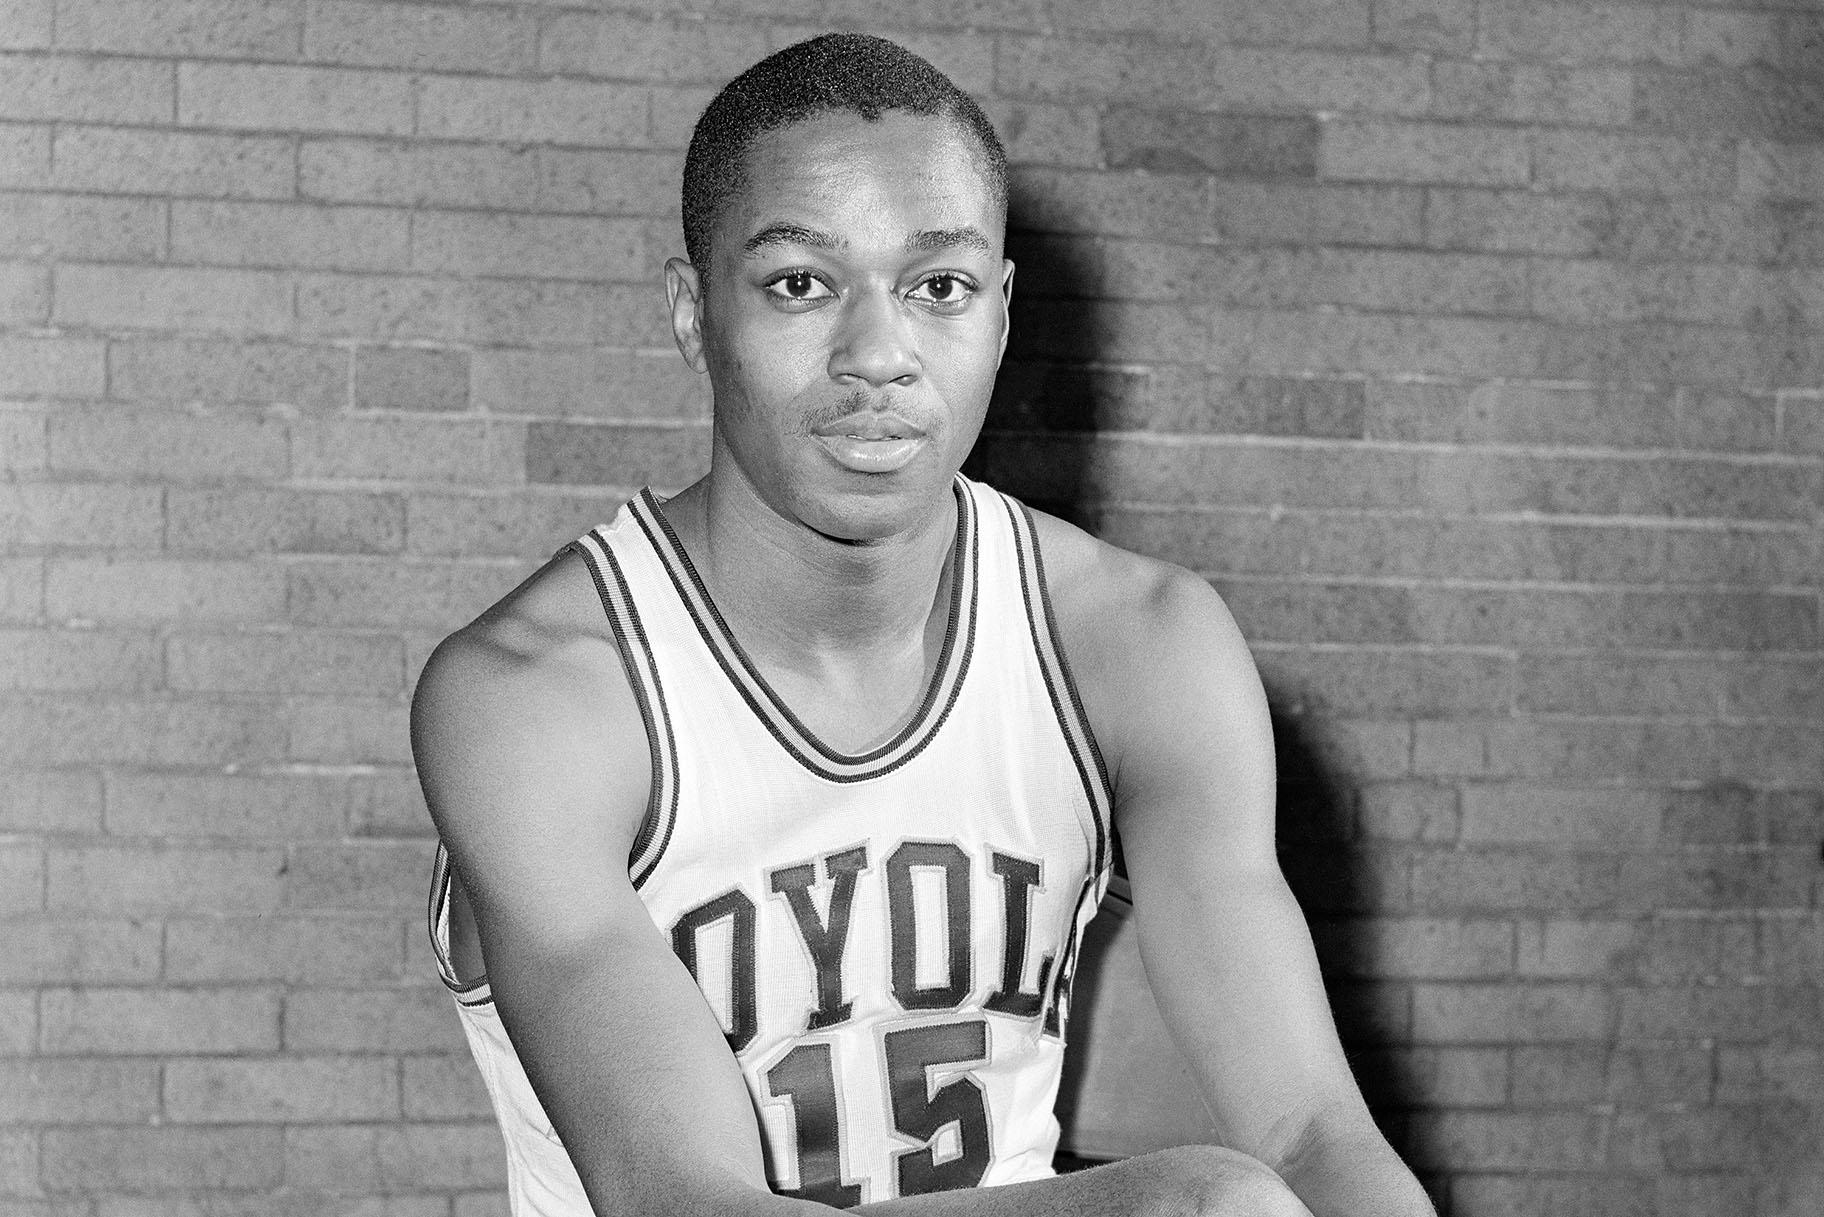 This is a Feb. 20, 1963, file photo showing Loyola University basketball player Jerry Harkness. (AP Photo / Paul Cannon, File)